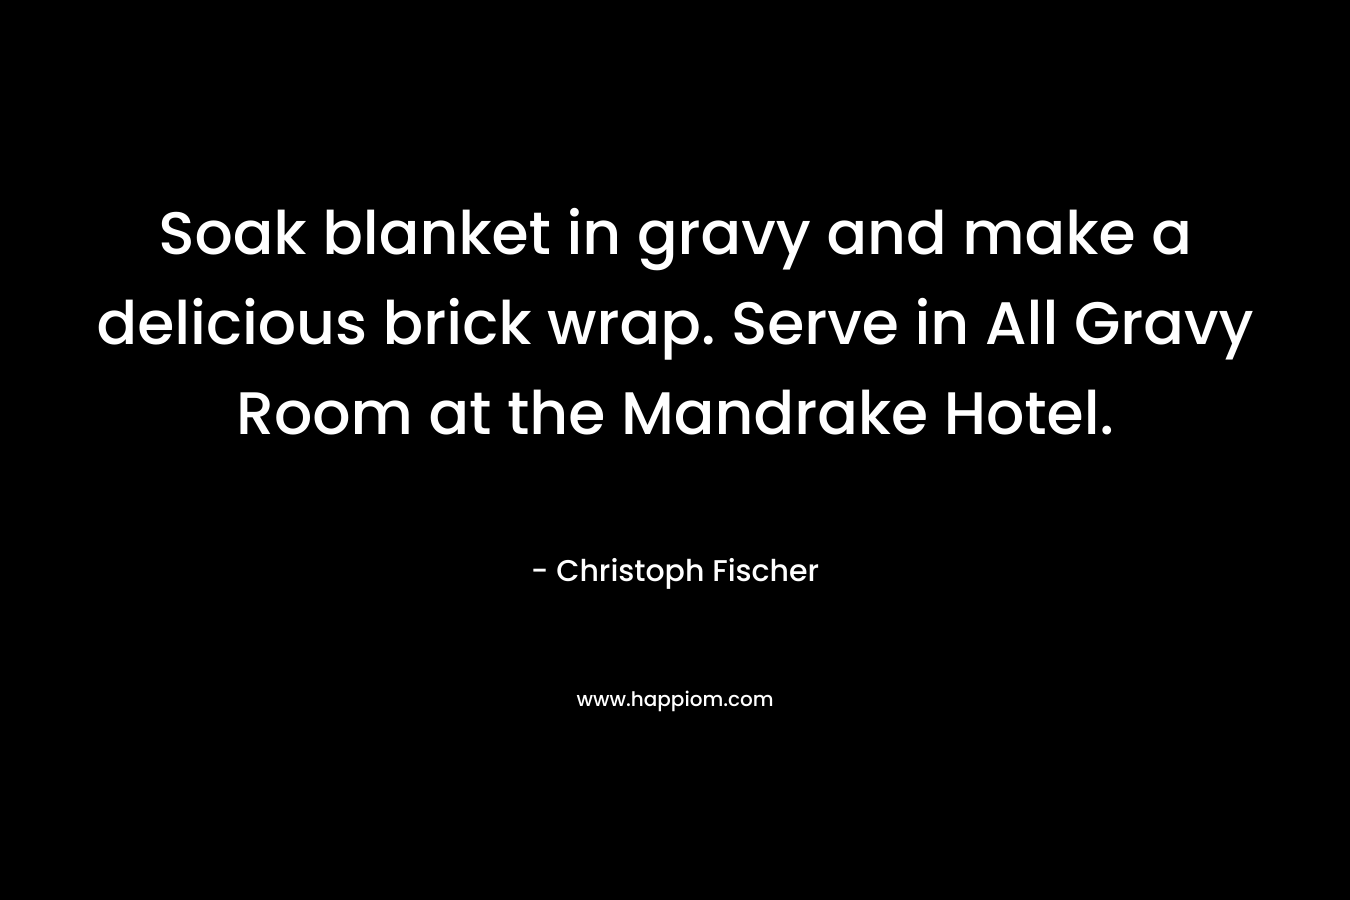 Soak blanket in gravy and make a delicious brick wrap. Serve in All Gravy Room at the Mandrake Hotel. – Christoph Fischer